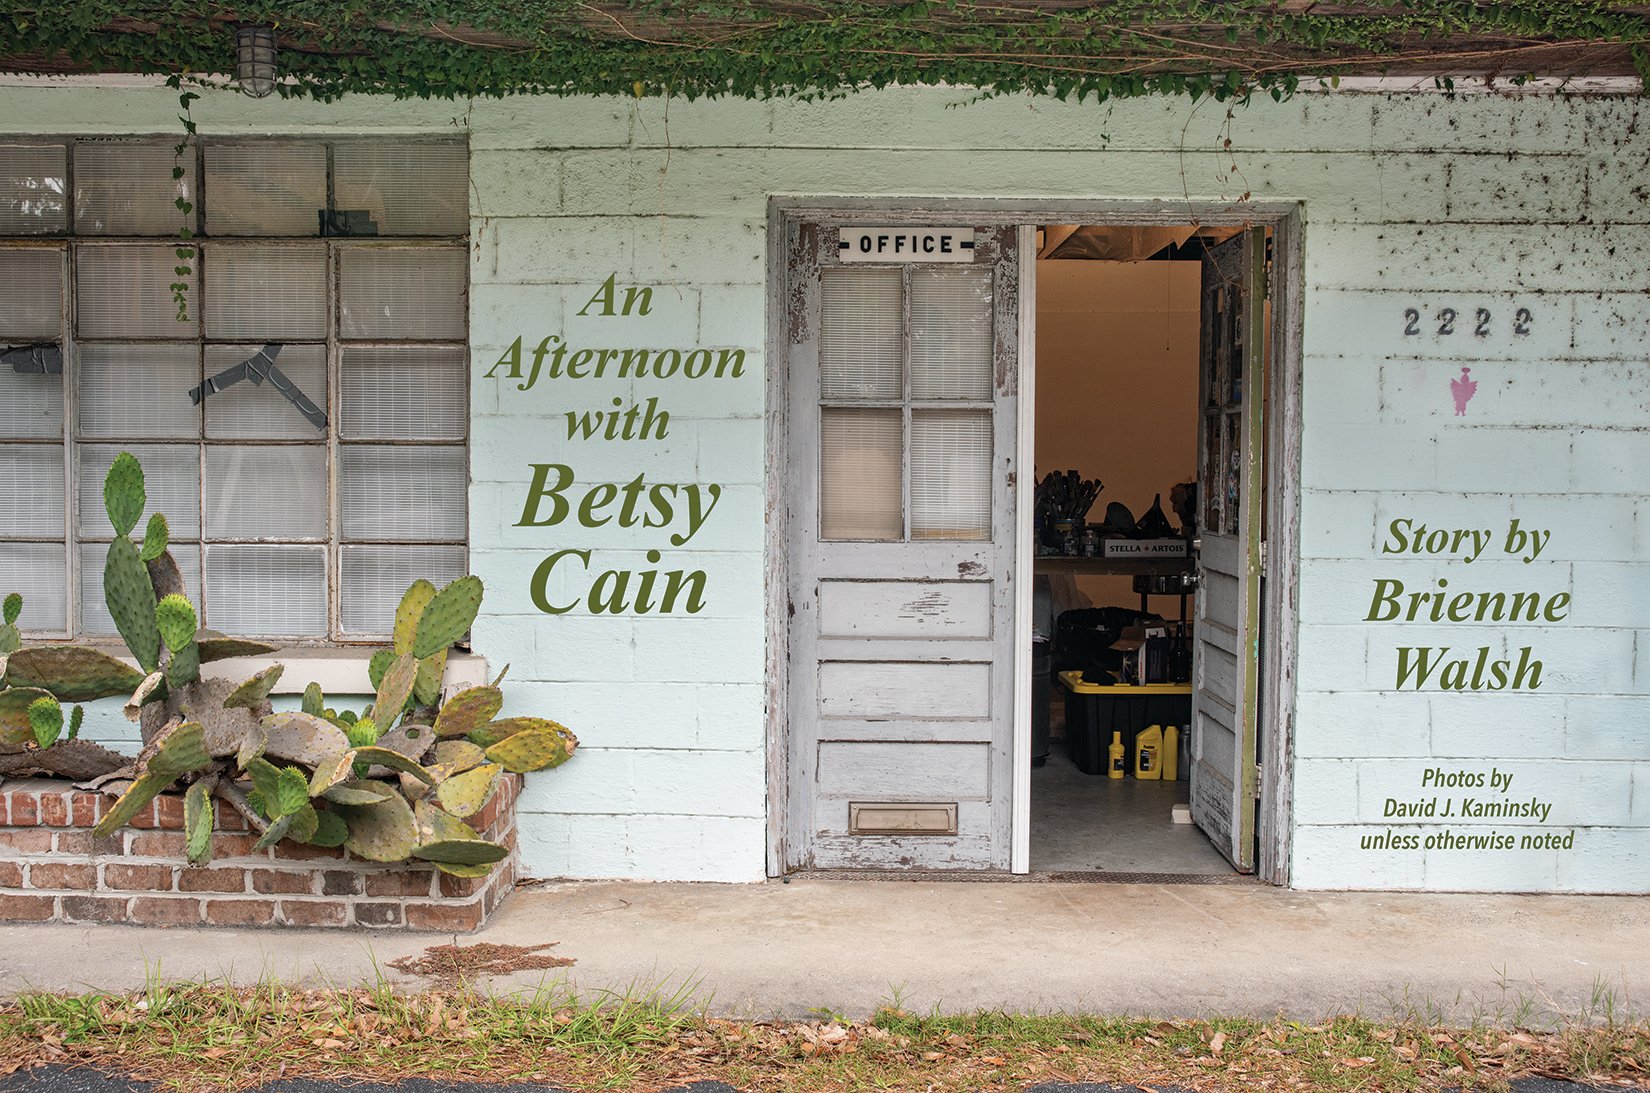 An Afternoon with Betsy Cain by Brienne Walsh